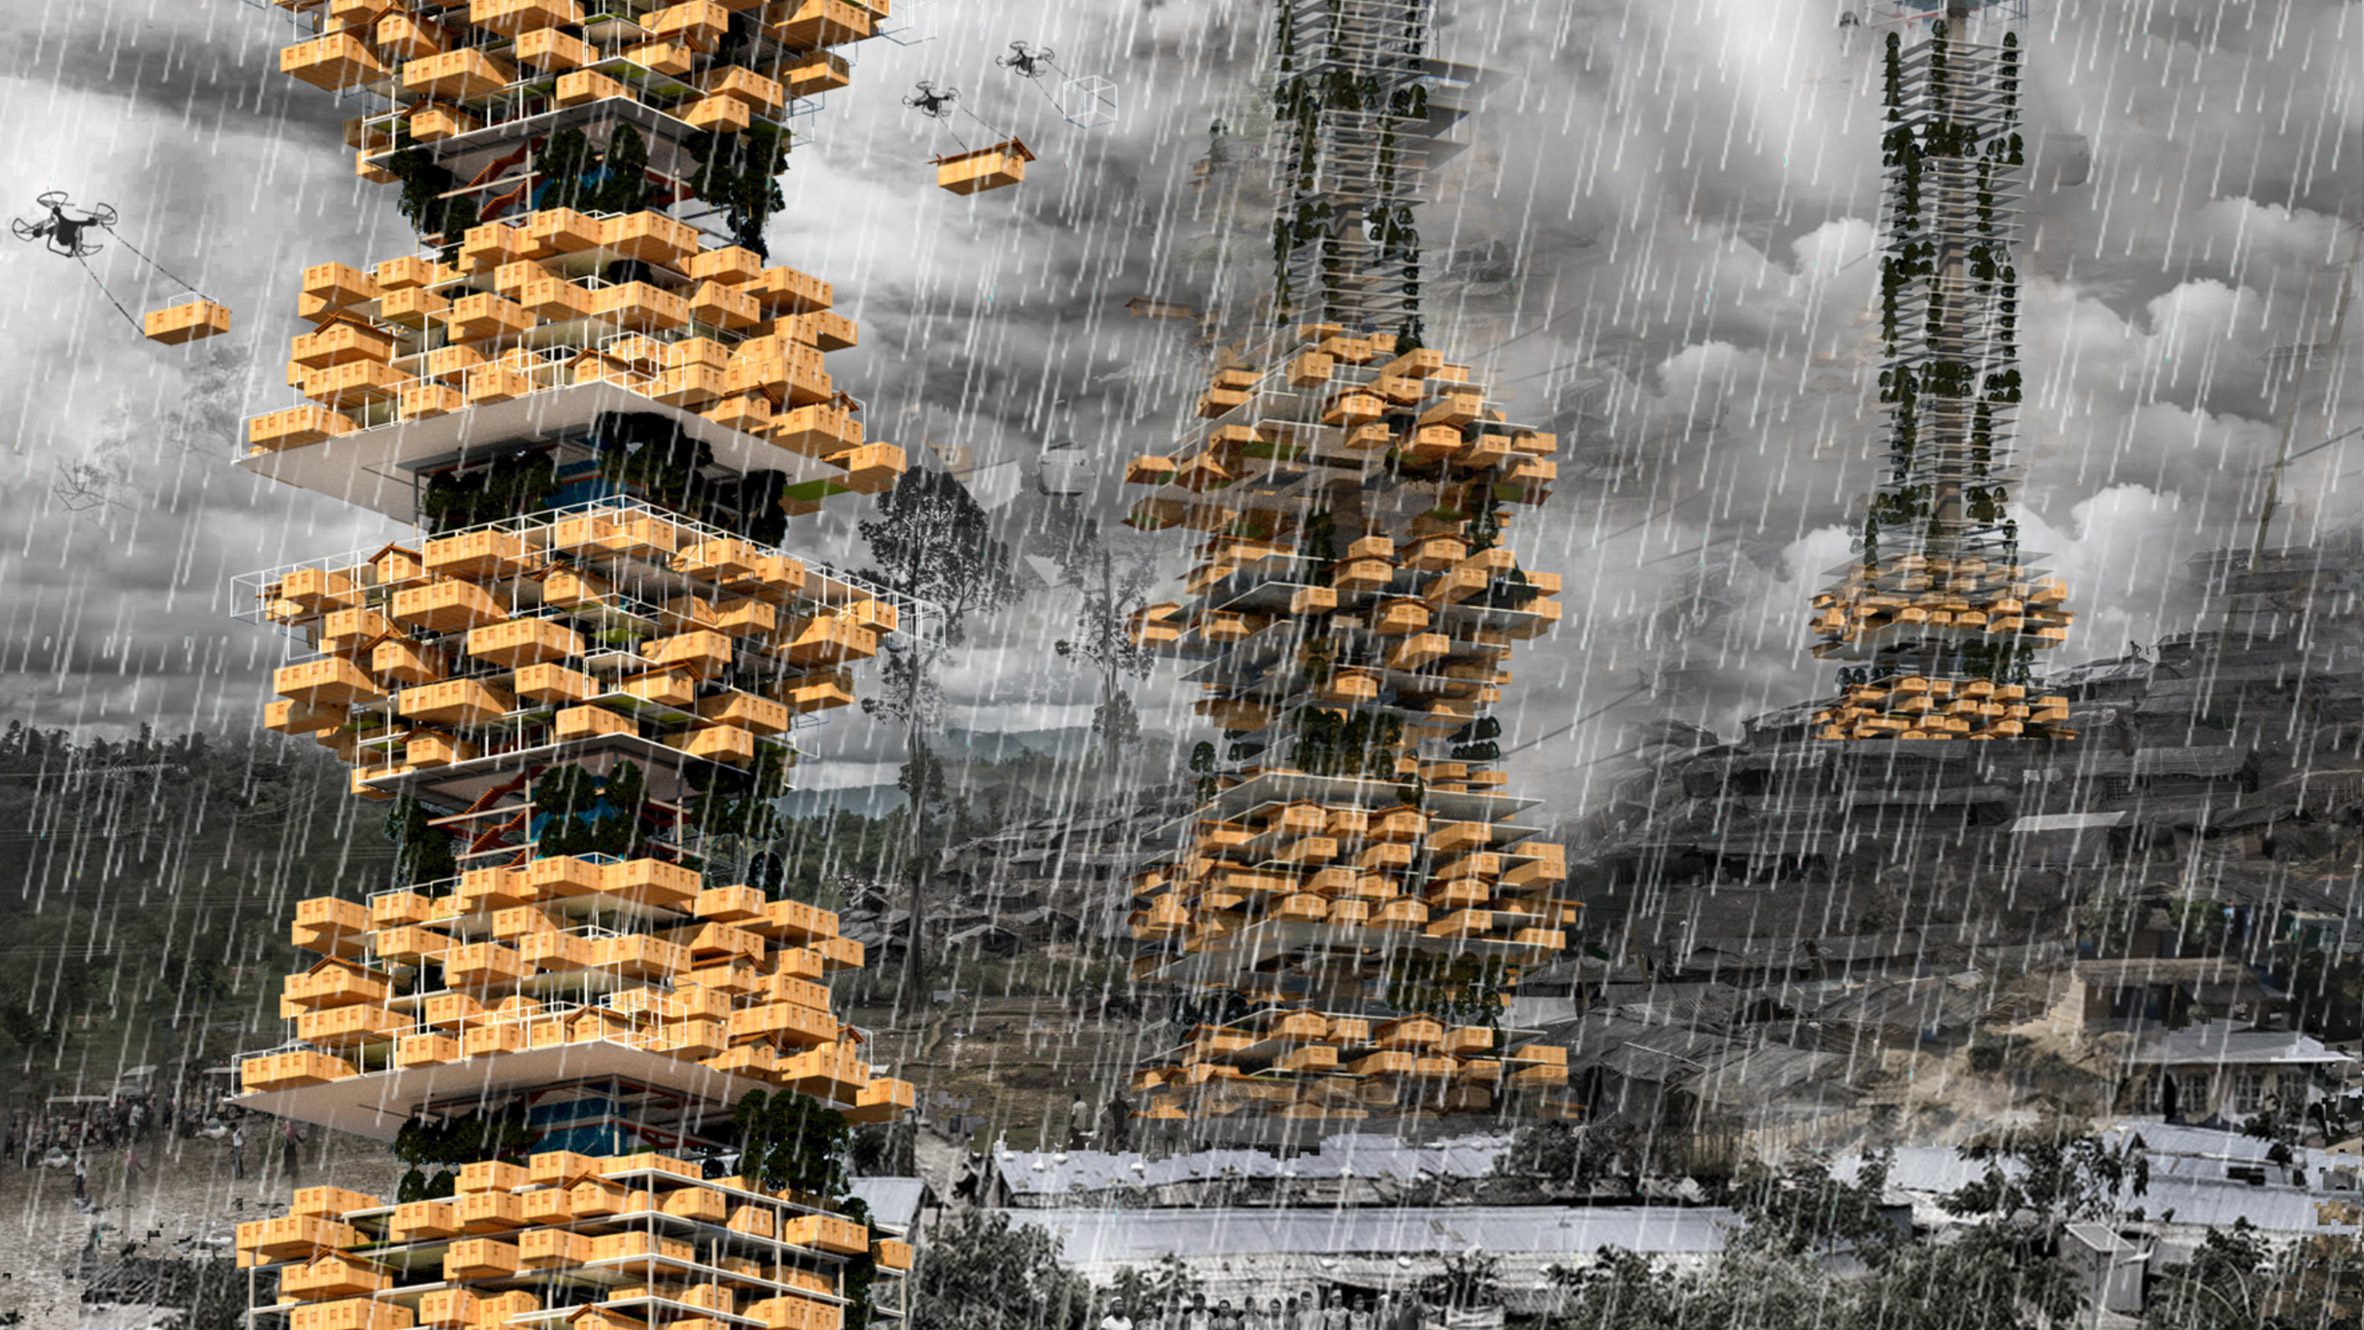 Architectural render of orange skyscrapers on a rainy day from design courses